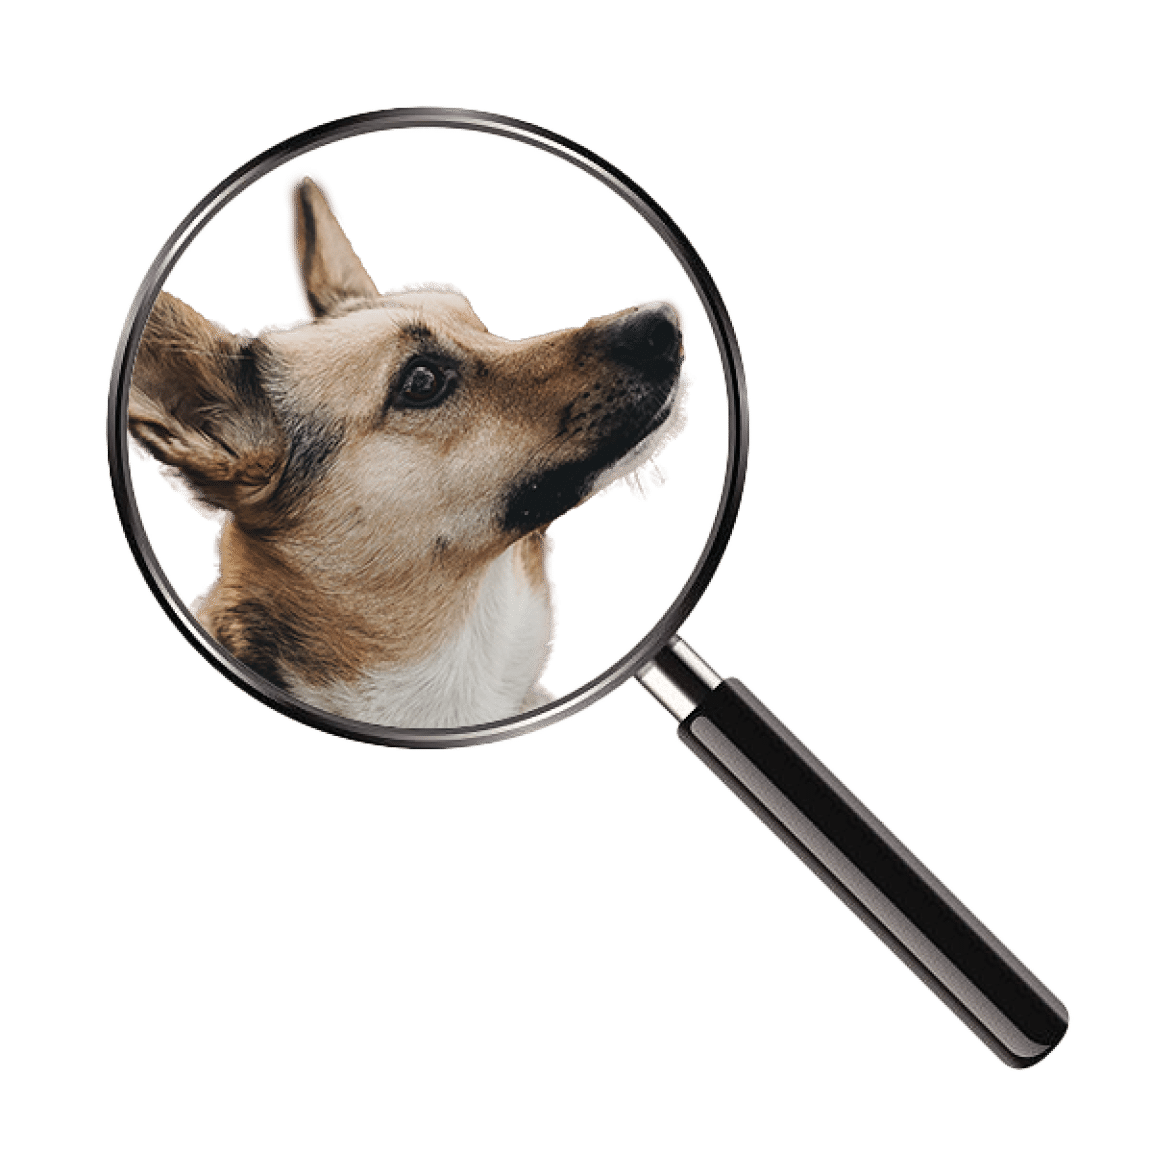 WHAT TO EXPECT DURING A PA DOG LAW INSPECTION